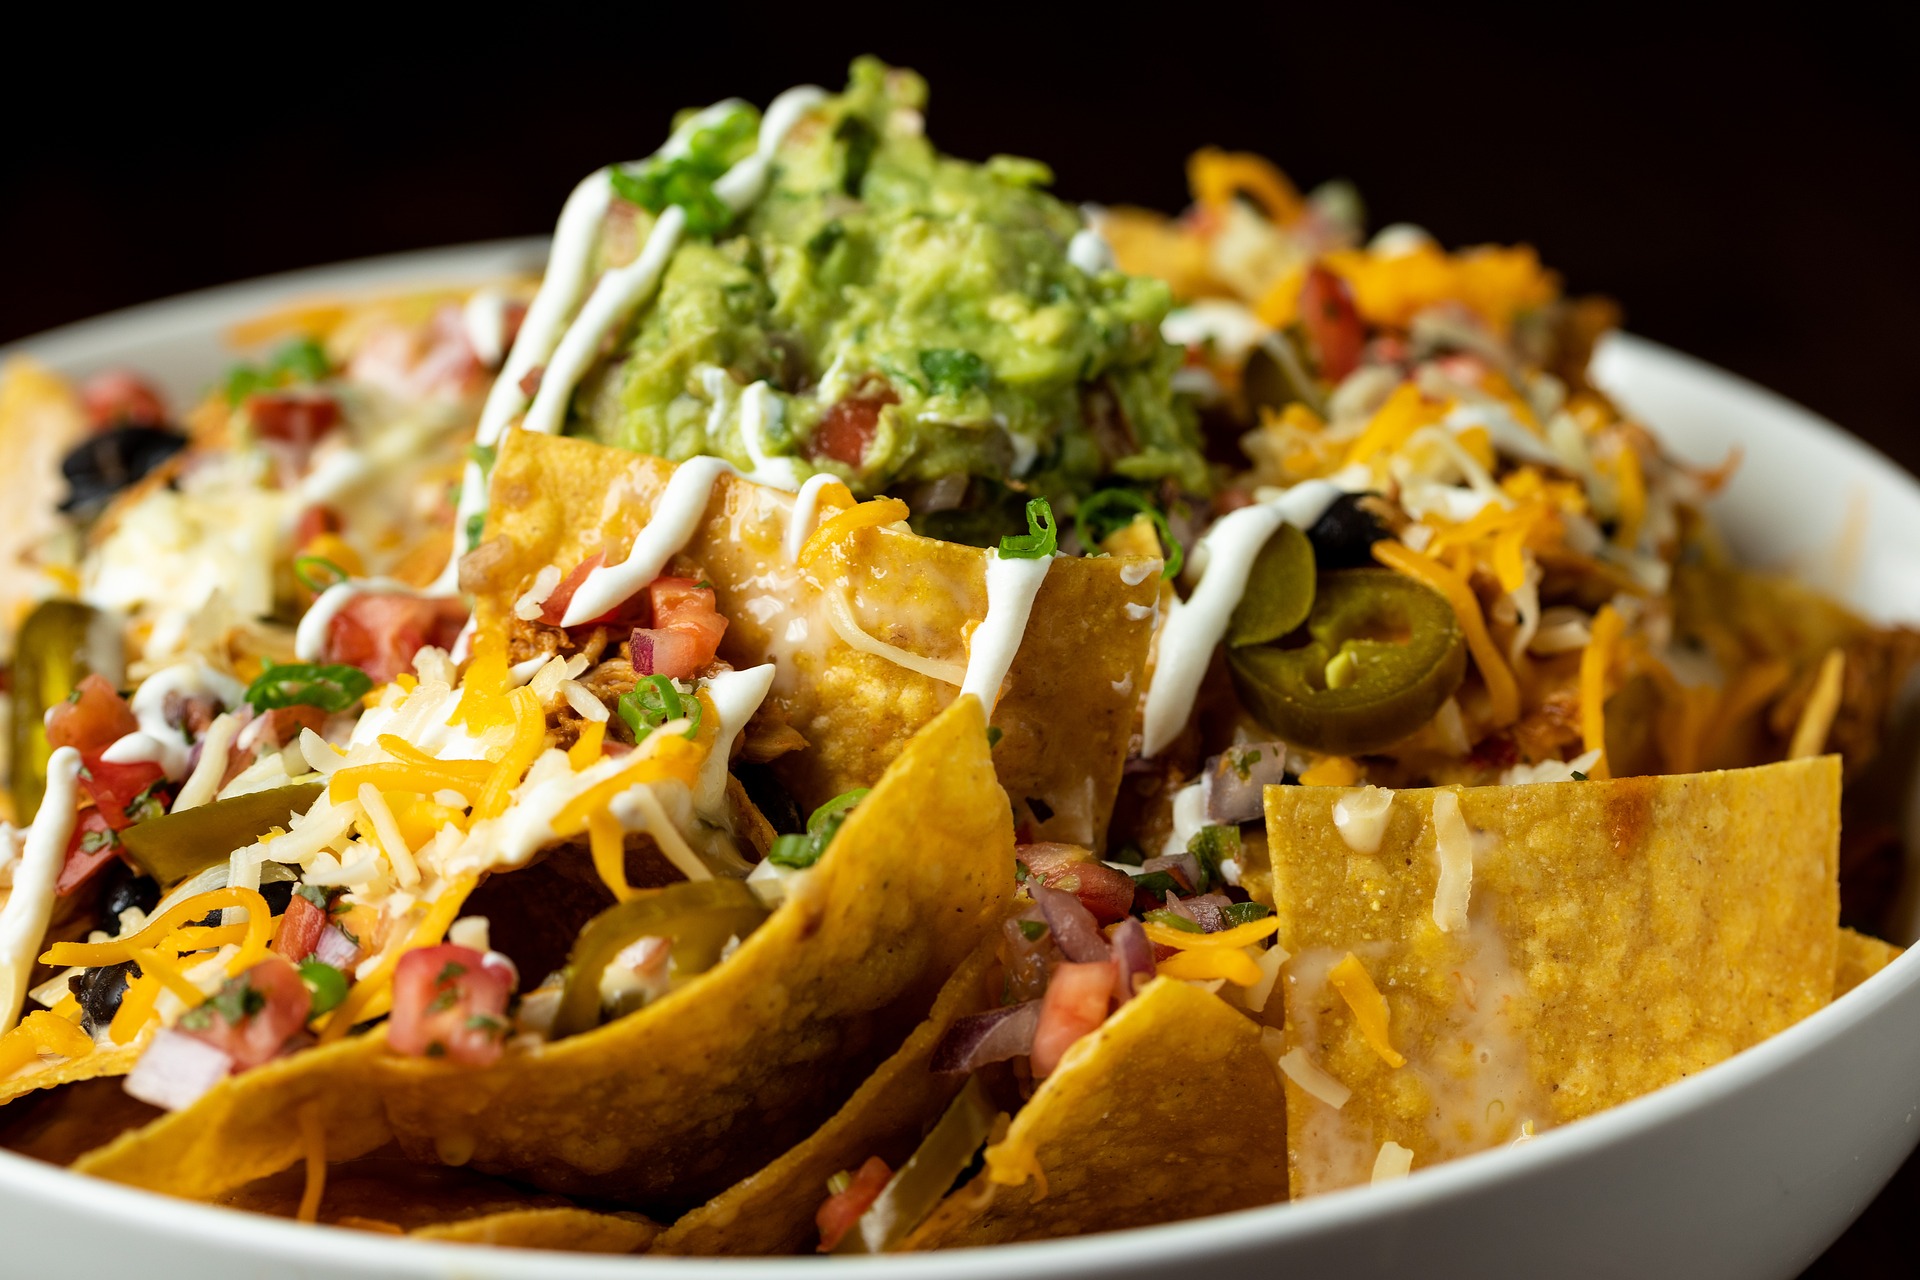 Are Nachos Good For Weight Loss?